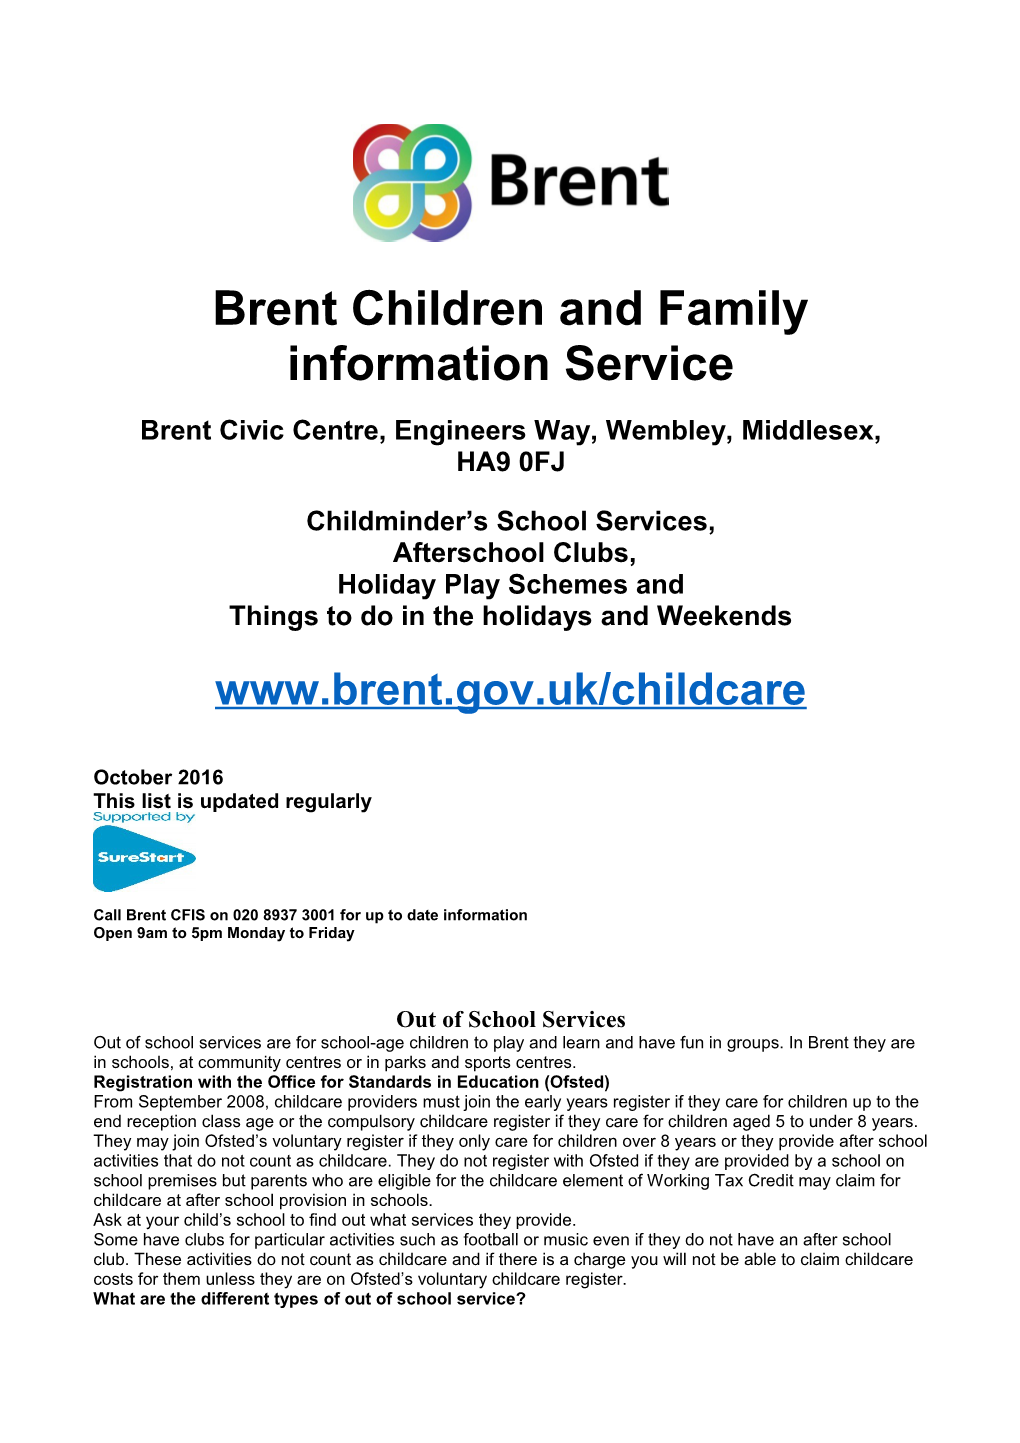 Brent Children and Family Information Service